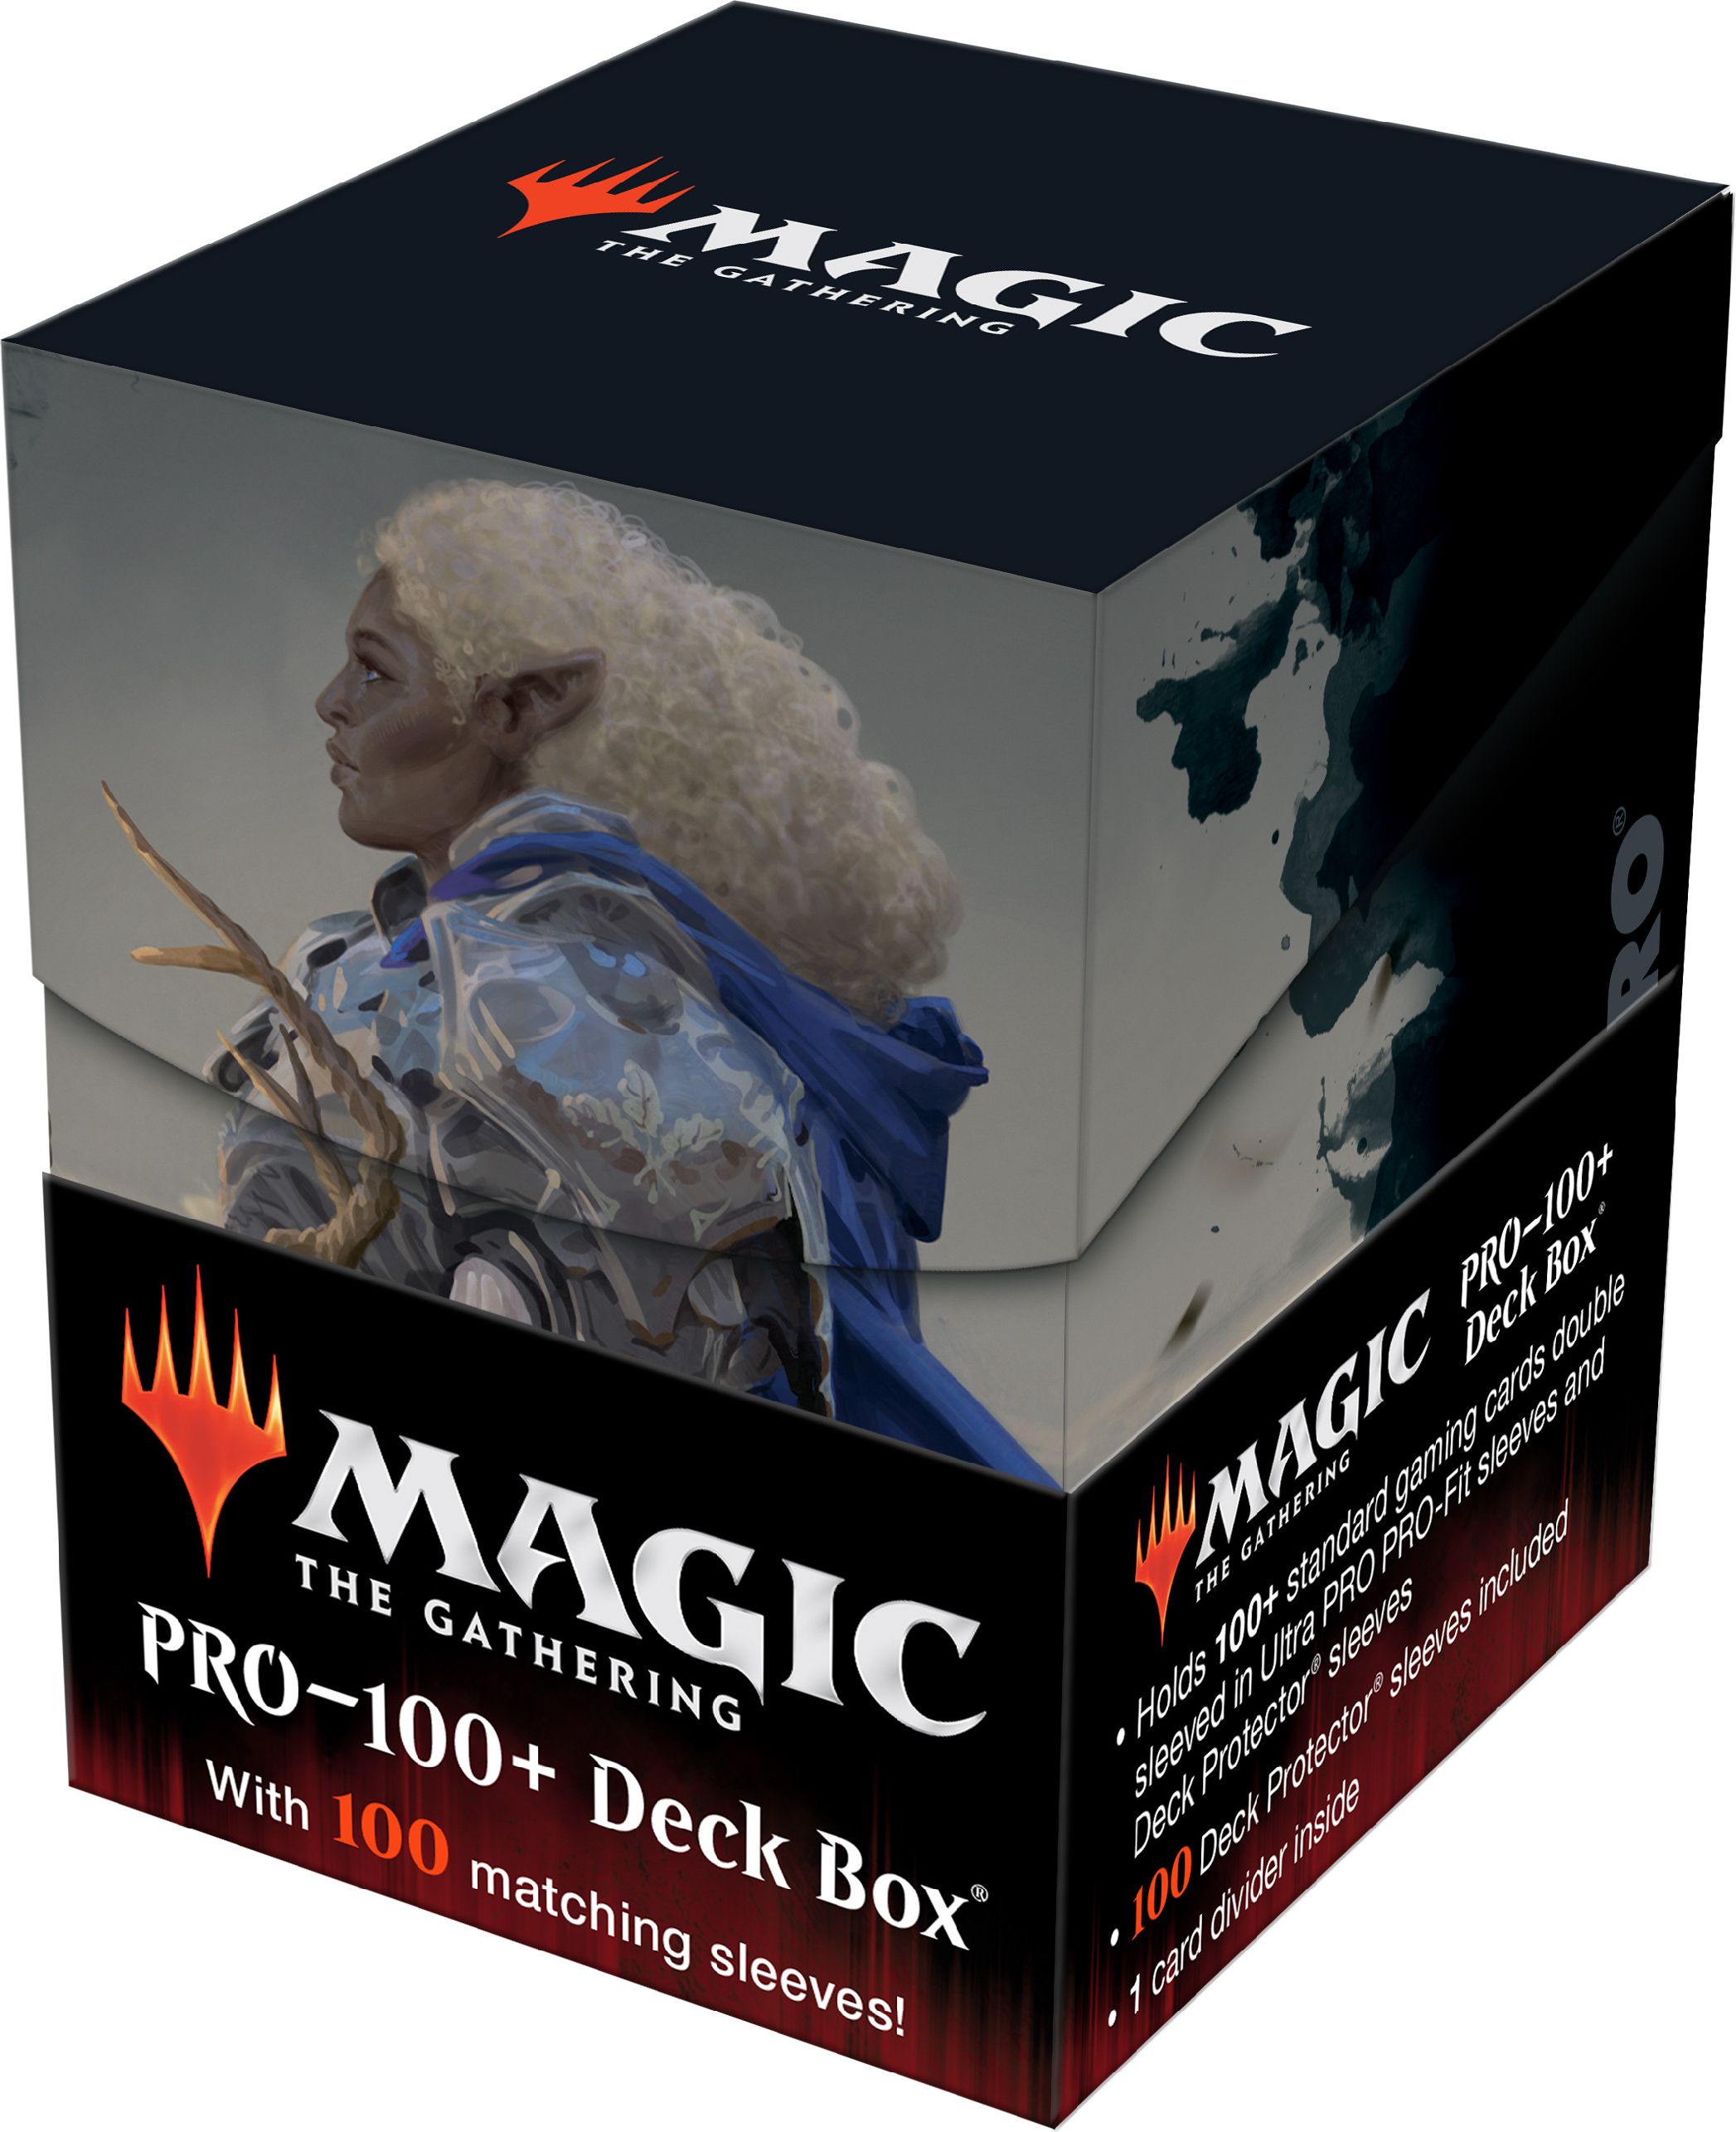 Ultra Pro UltraPro Deck Box 100+ Commander Adventures in the Forgotten Realms + 100ct sleeves V4 for Magic: The Gathering - obrázek 1